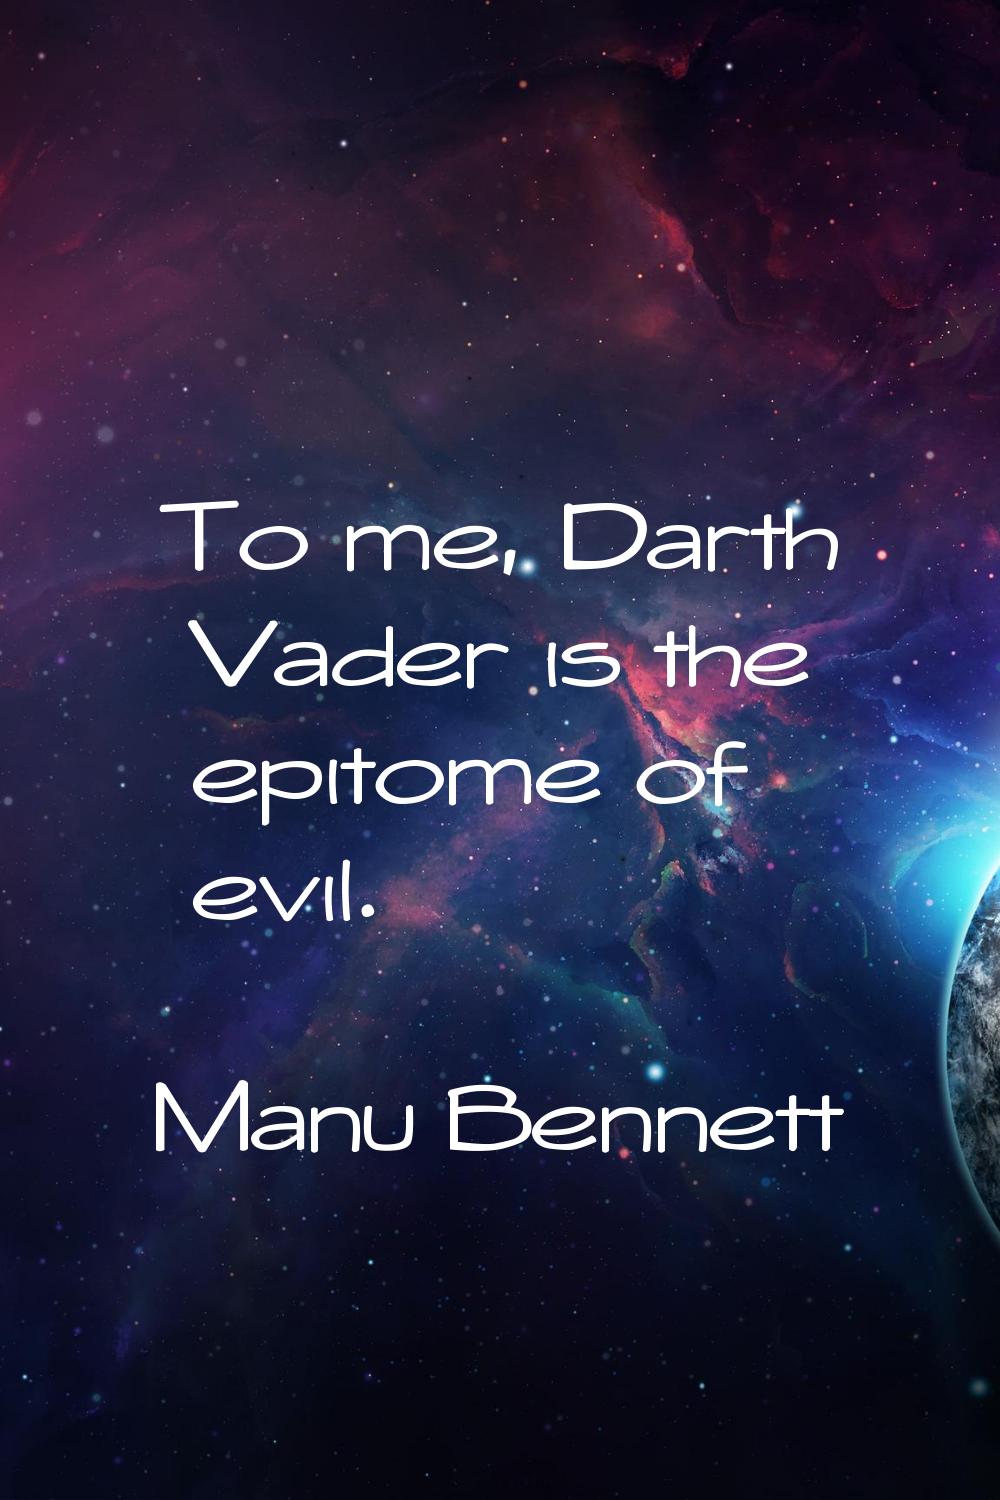 To me, Darth Vader is the epitome of evil.